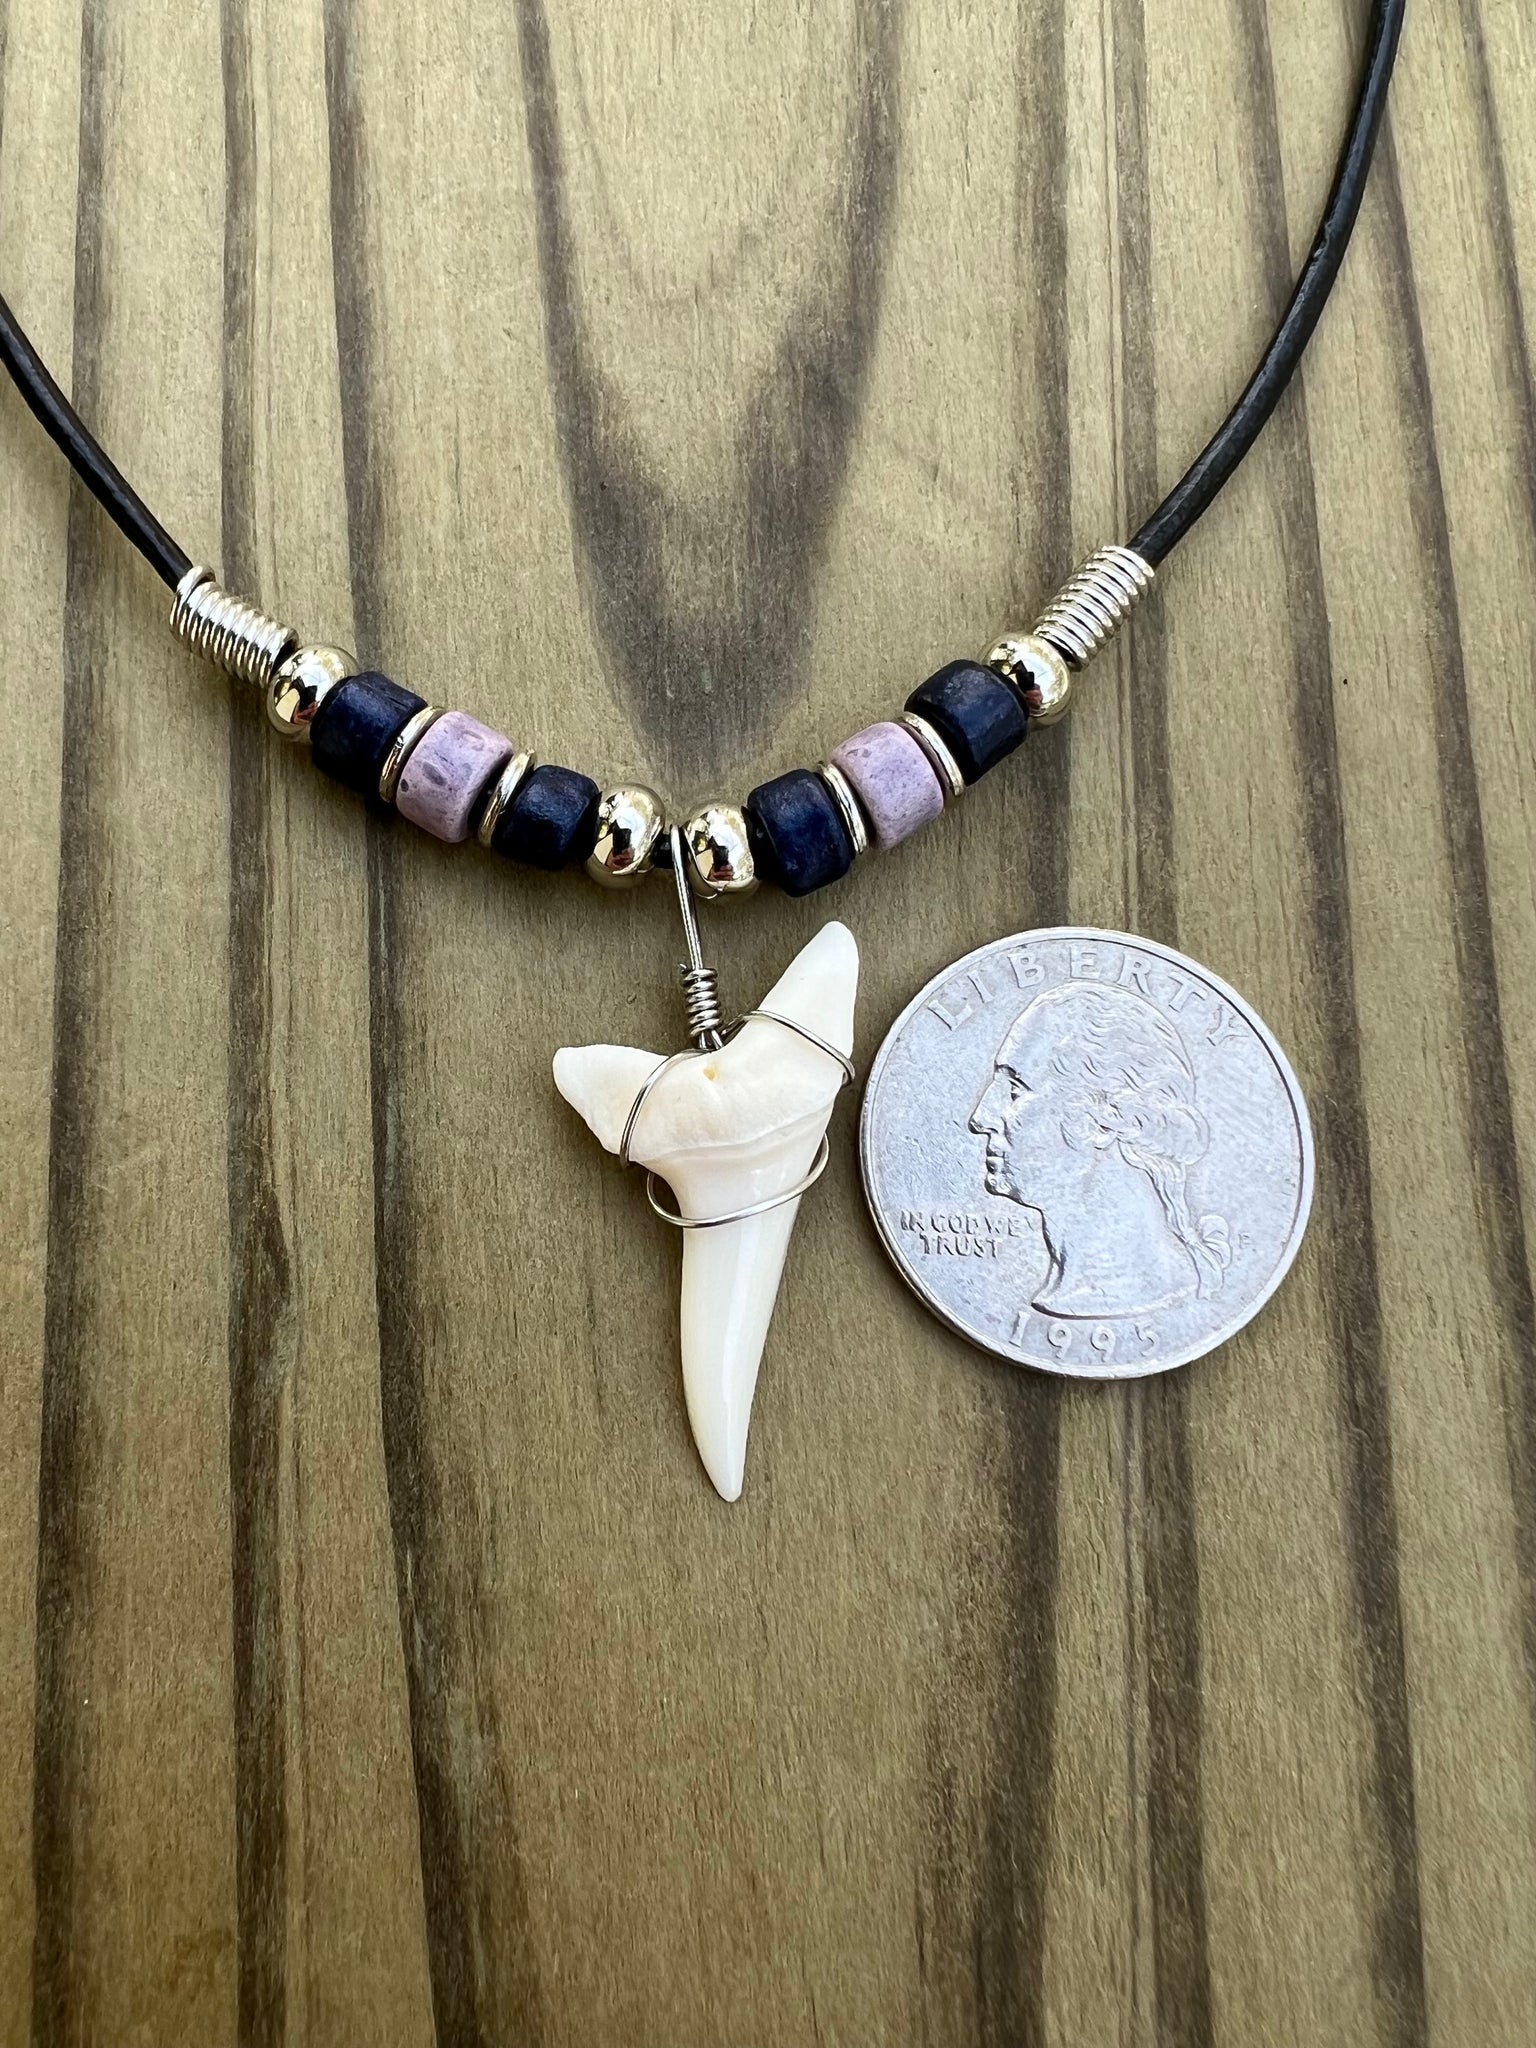 White Shark Tooth Necklace Dark Blue and Purple Beads – Real Shark Tooth  Necklaces